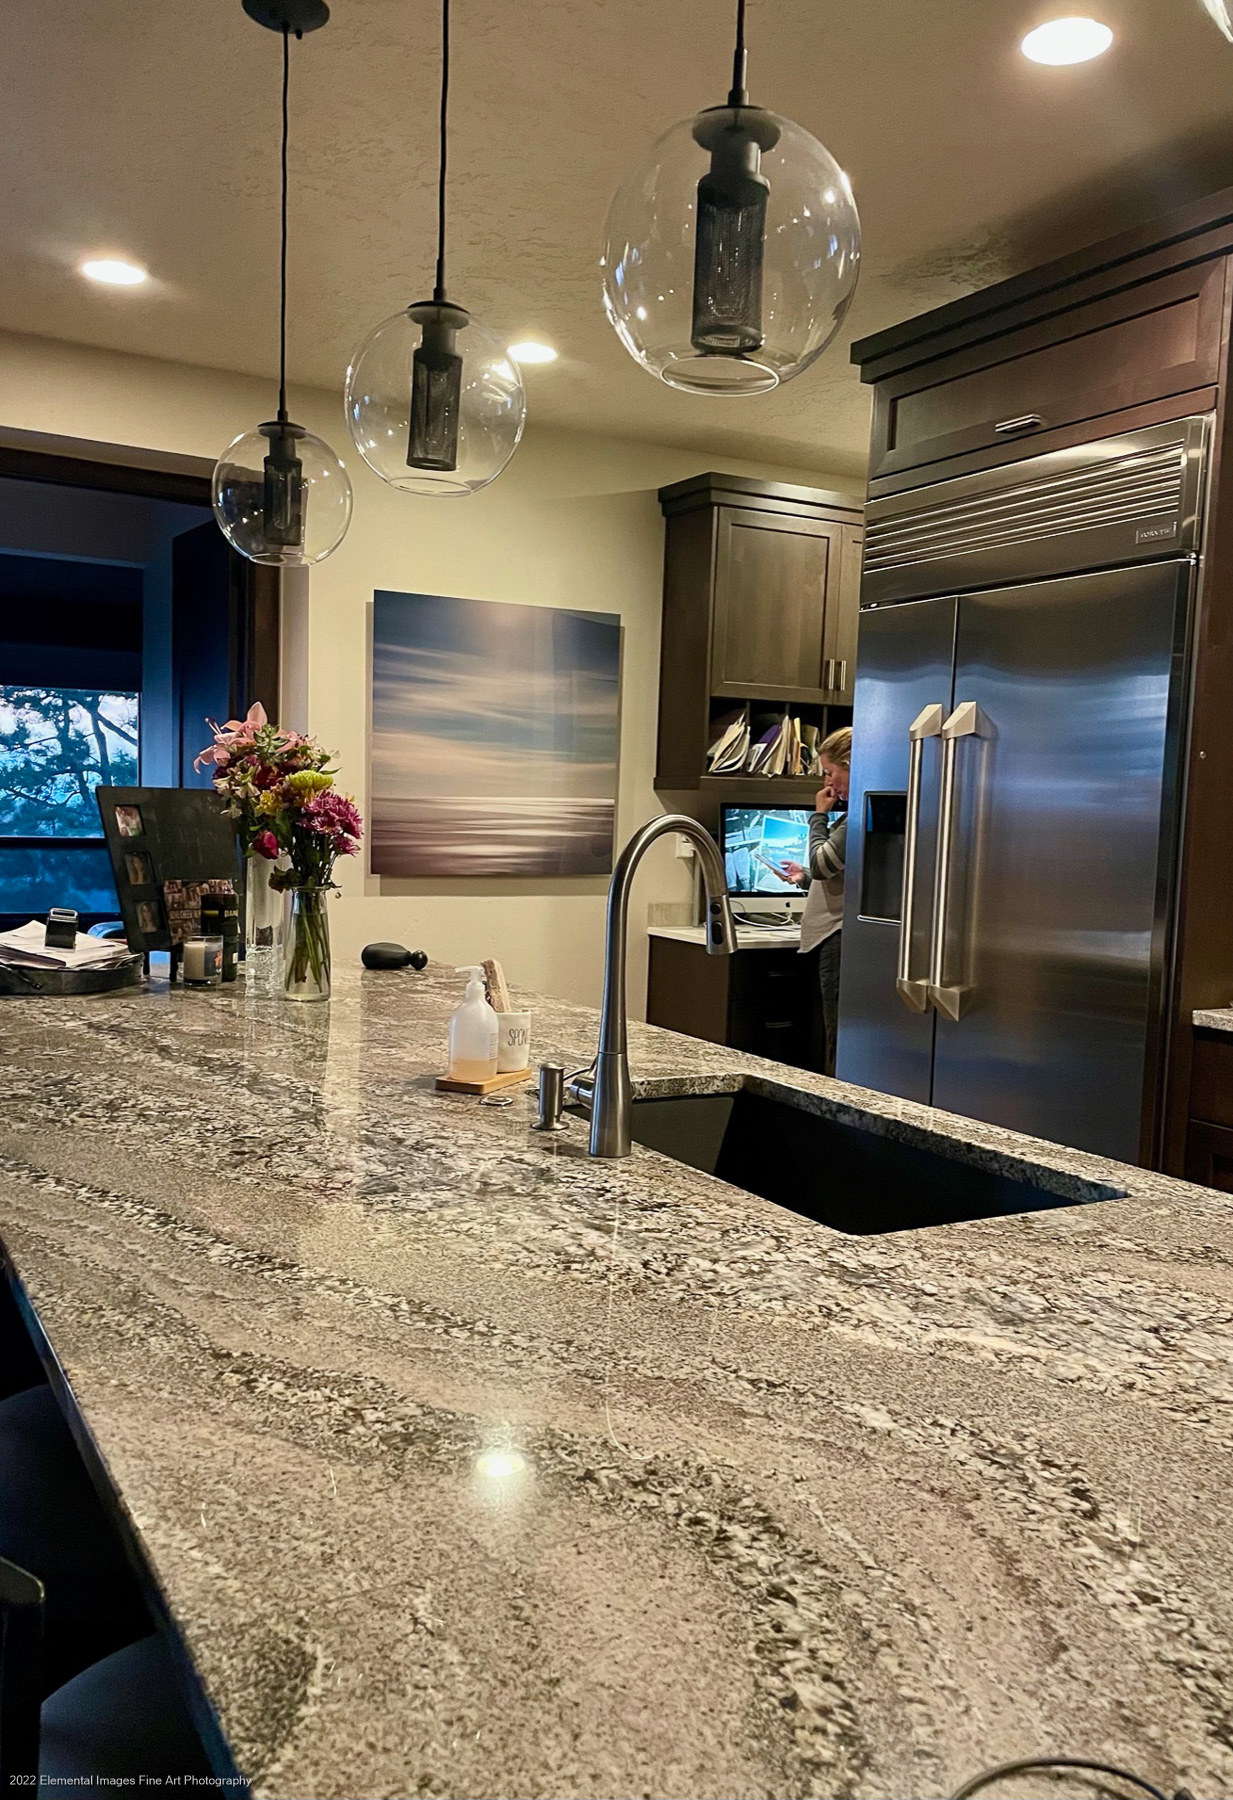 Sea and Sky in Kitchen - 40x40 |  |  |  - © 2022 Elemental Images Fine Art Photography - All Rights Reserved Worldwide